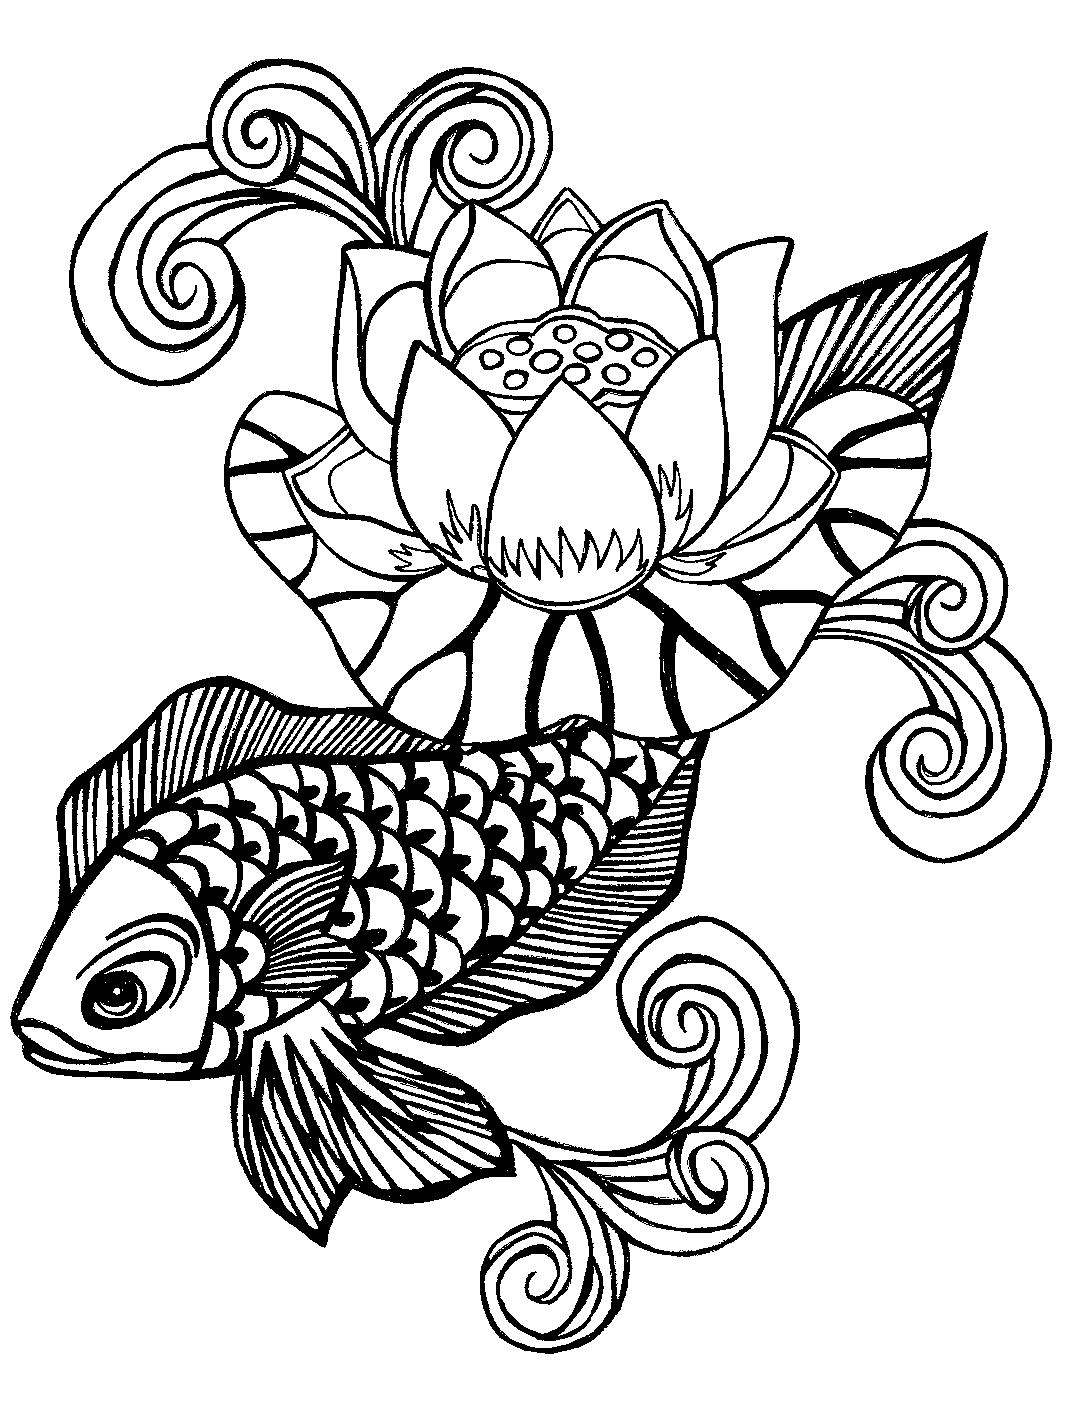 Black And White Pictures Of Tattoos - Clipart library